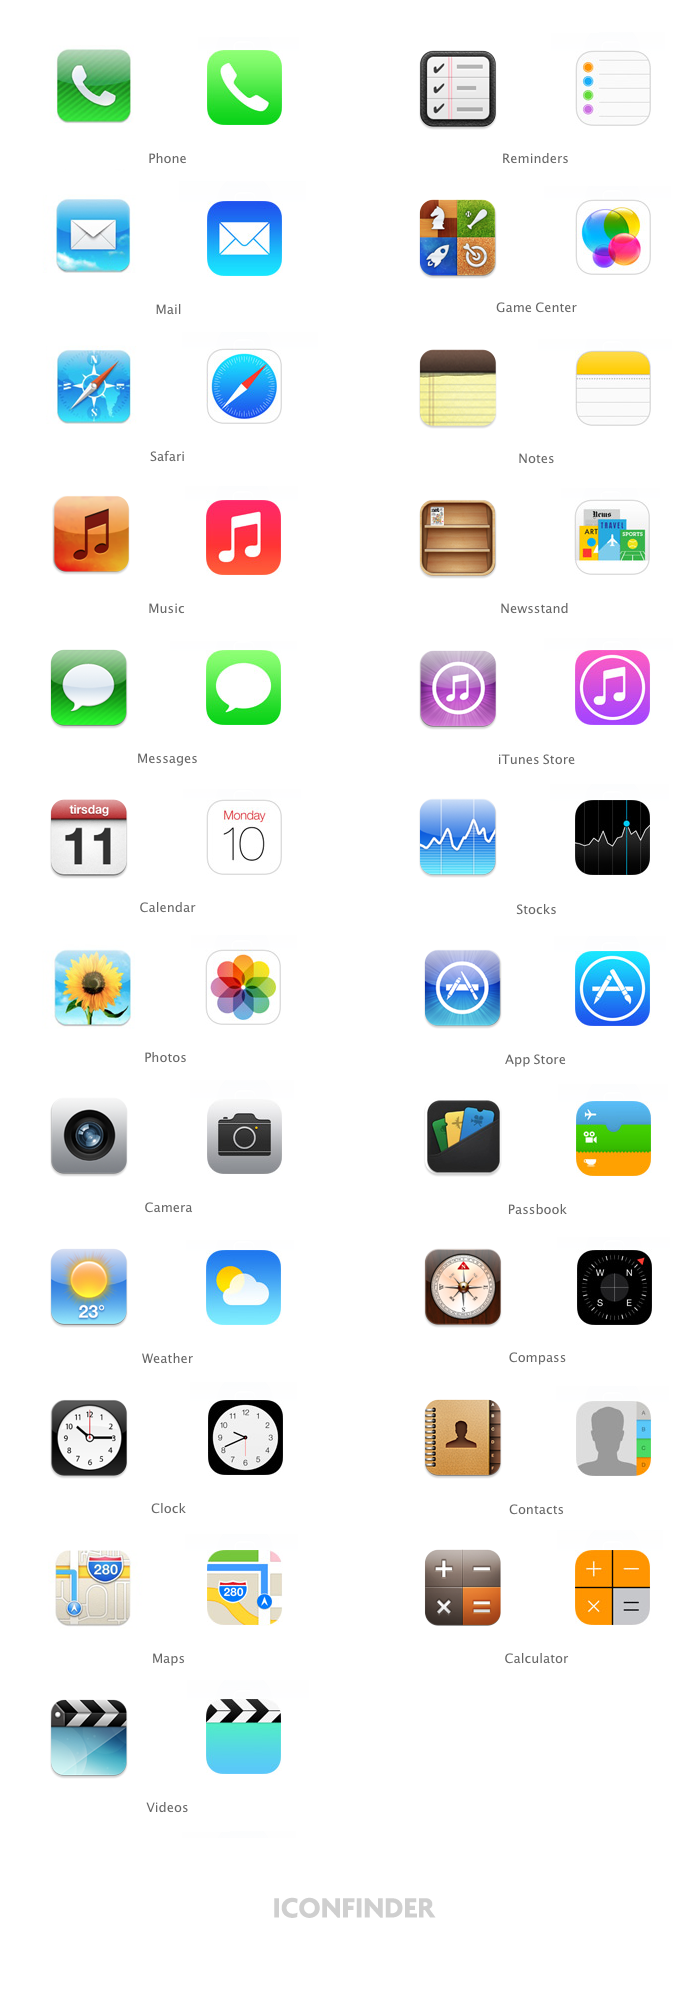 Apple iPhone Icons Meaning